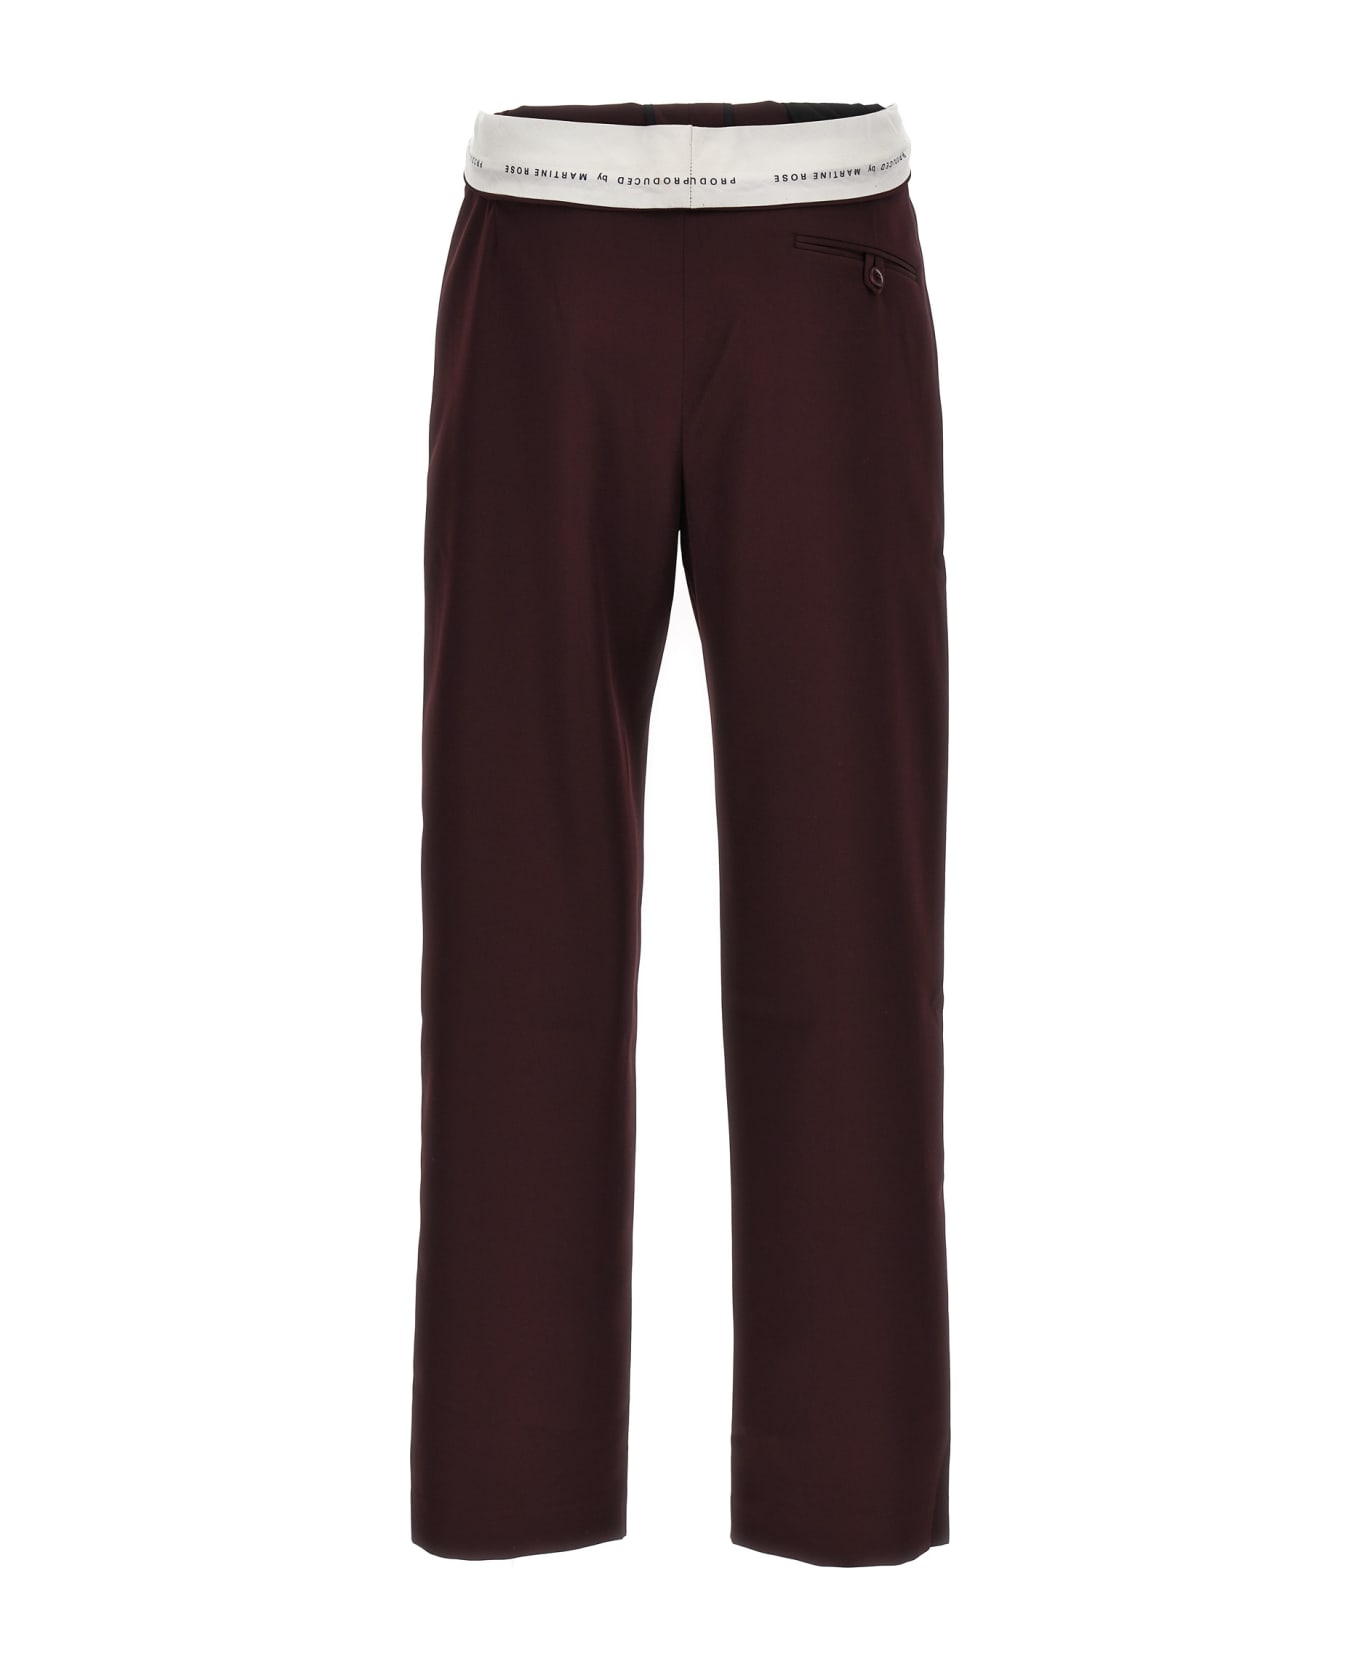 Martine Rose 'rolled Waistband Tailored' Pants - Bordeaux